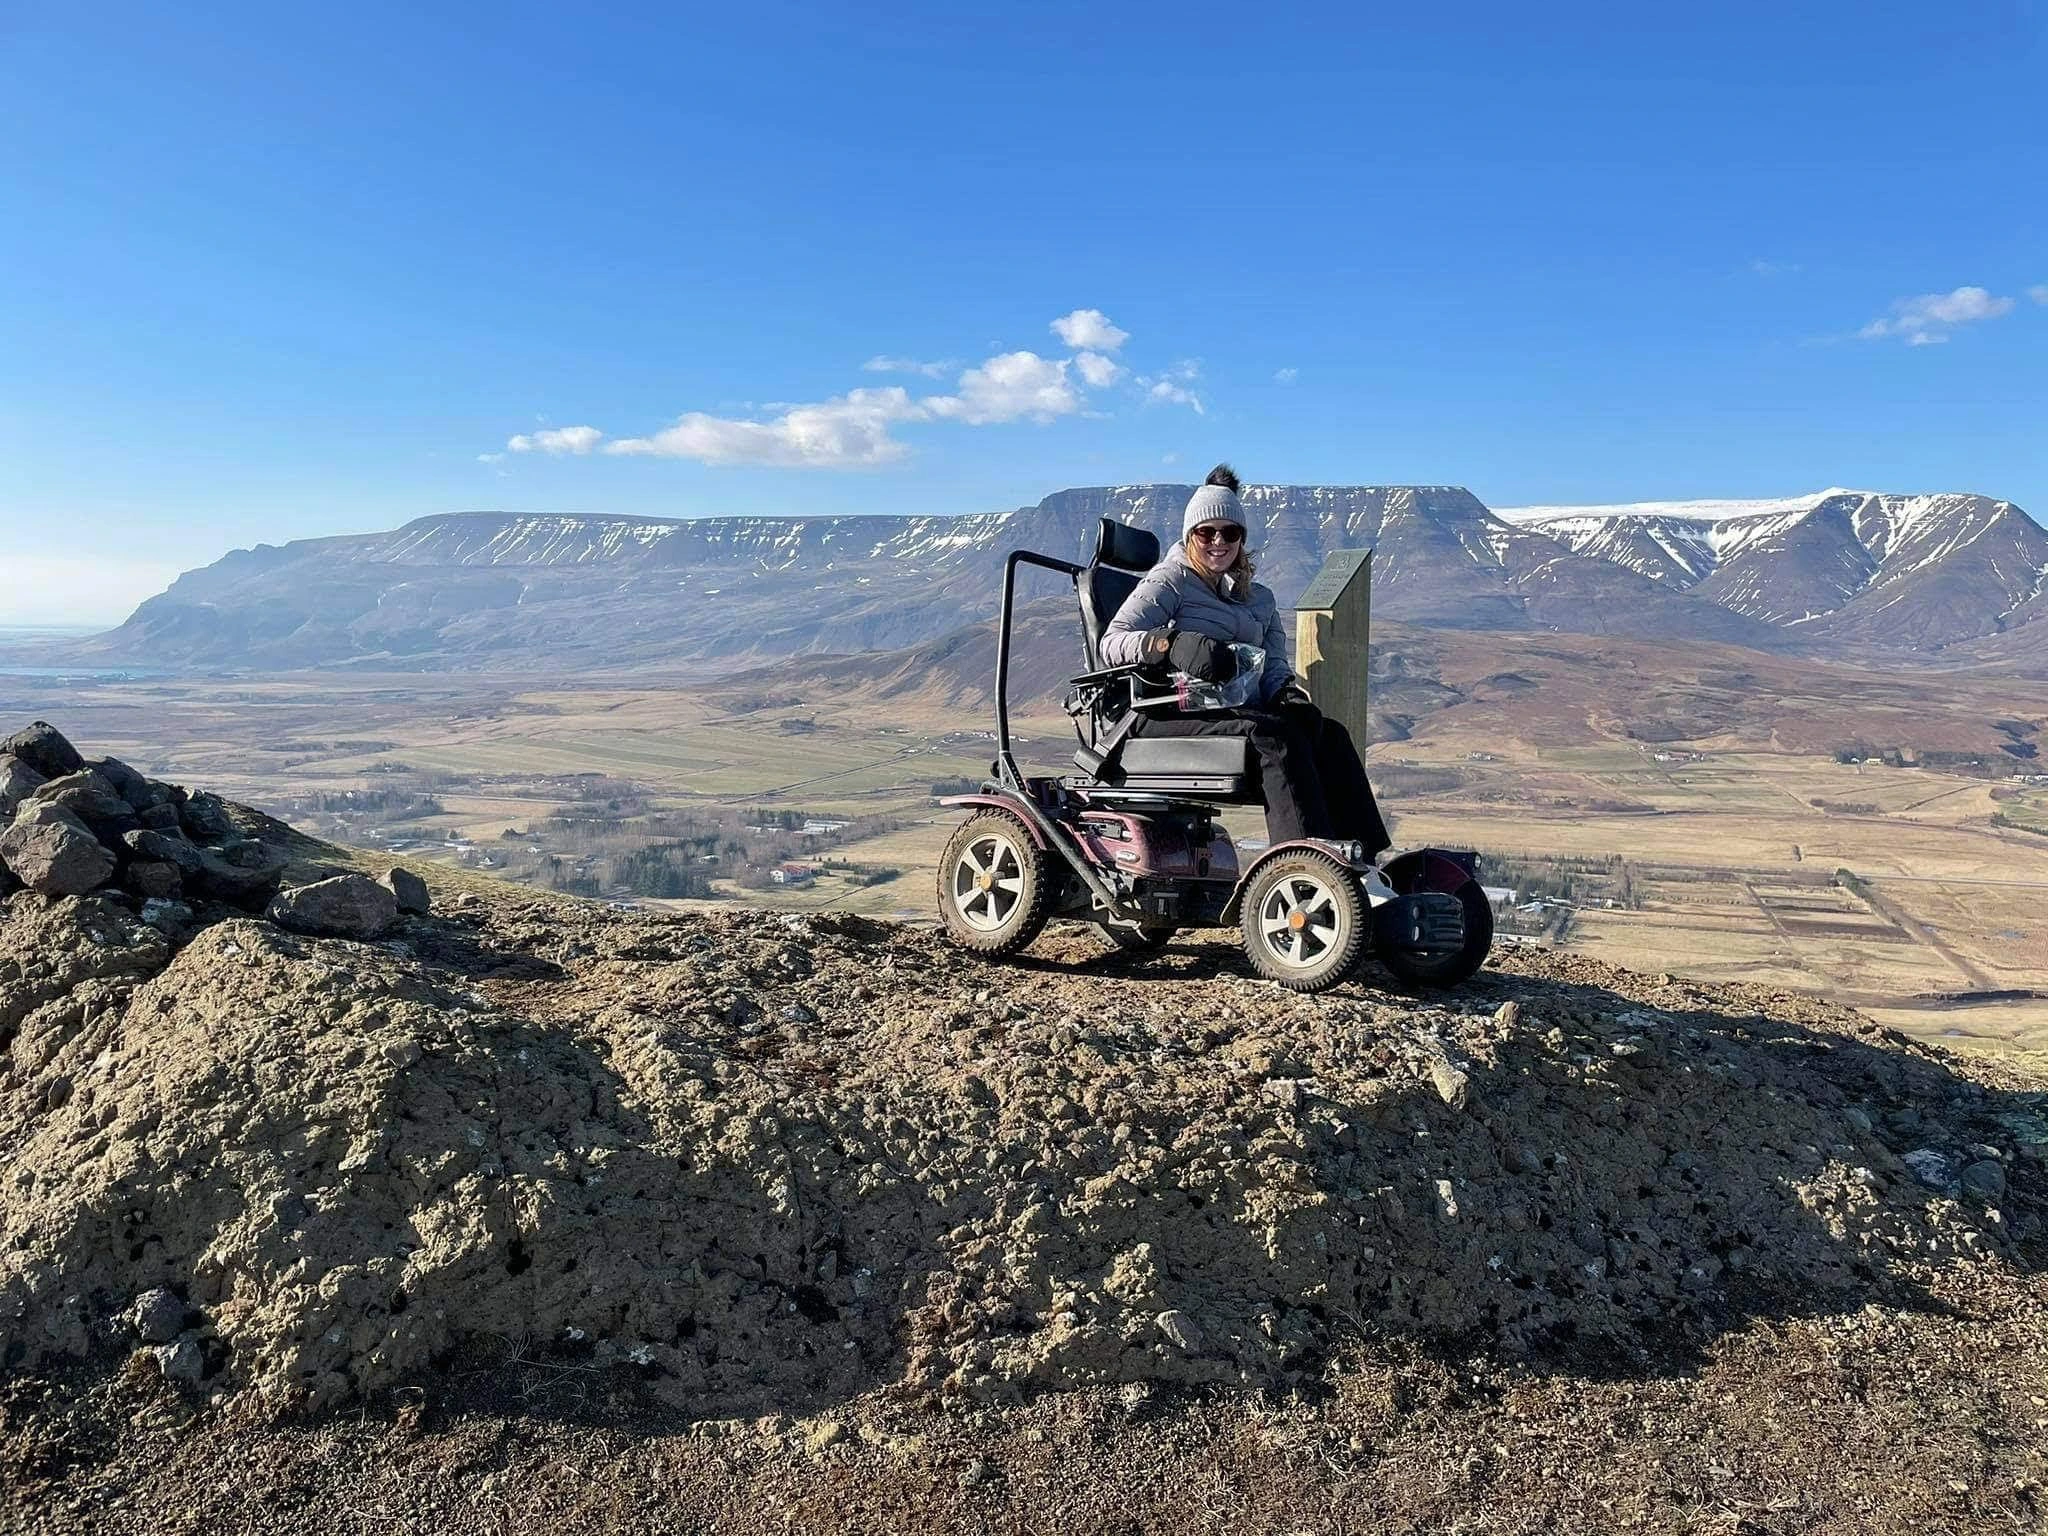 Young woman in an x850 on a rocky mound with Icelandic mountains and blue sky in the background